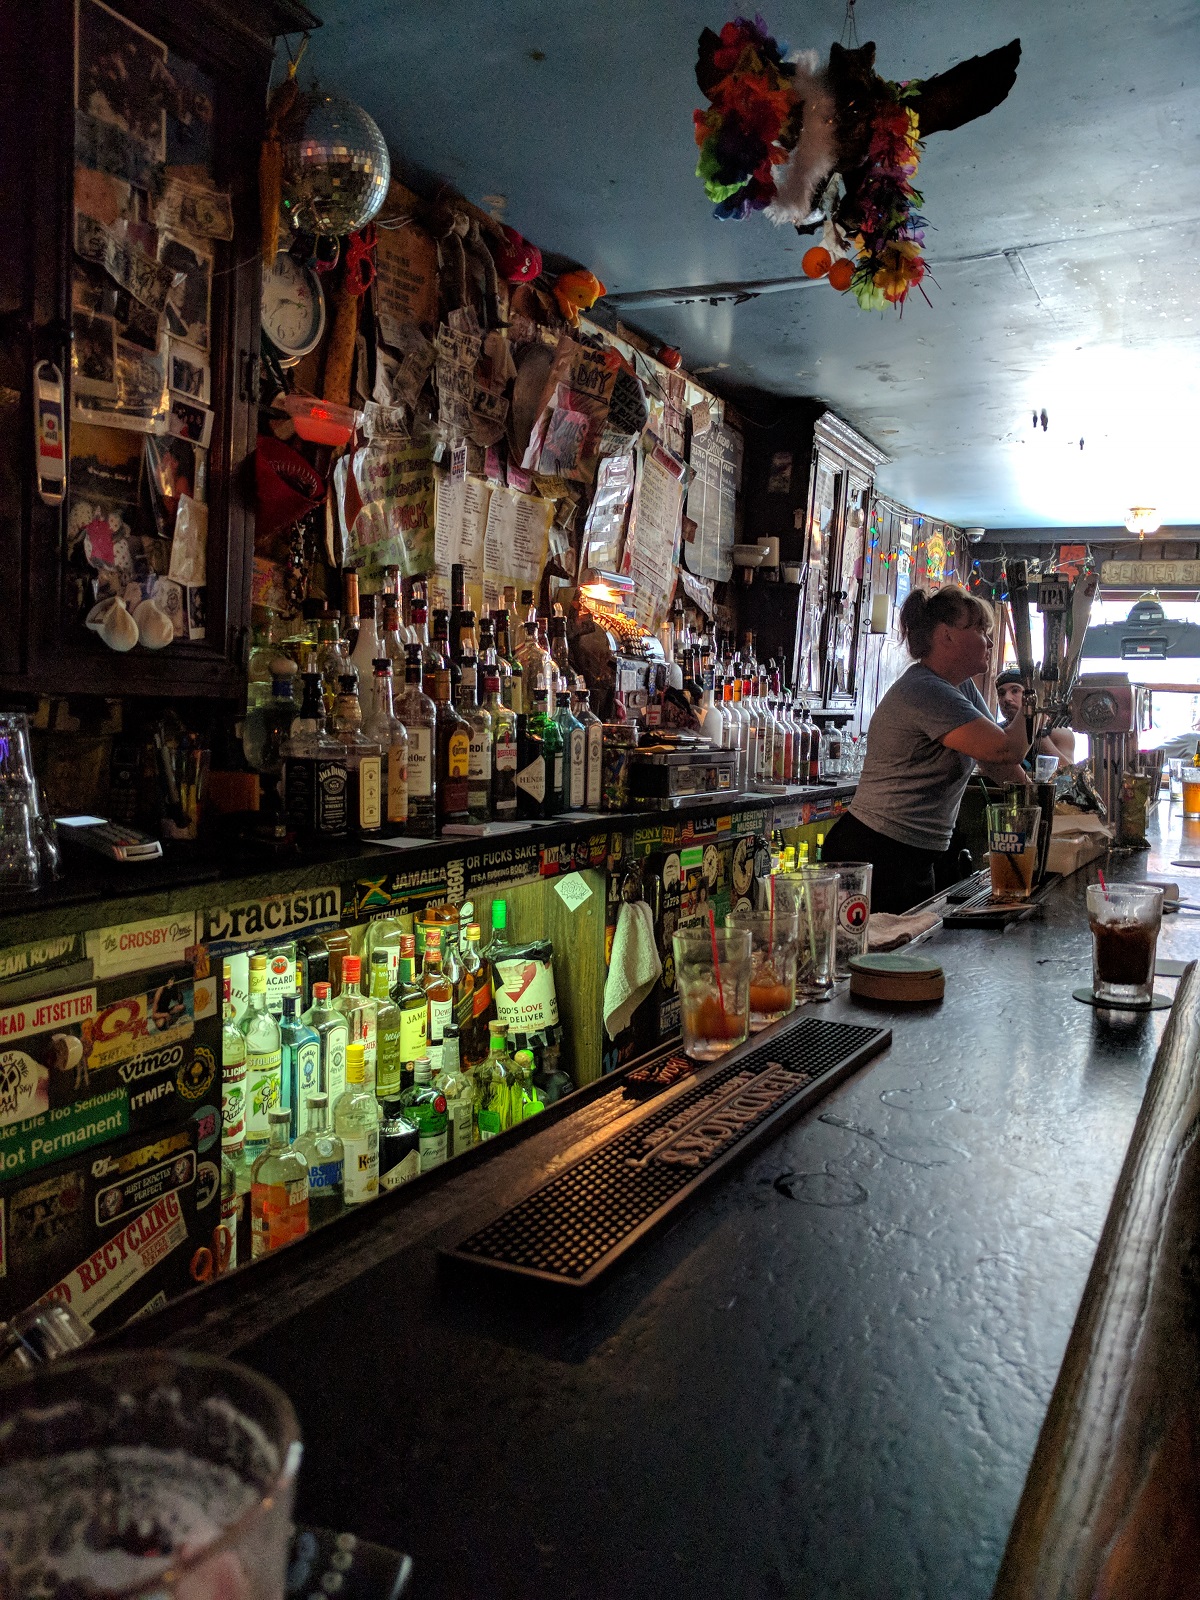 View behind the bar of a dive bar with many colored bottles of liquor